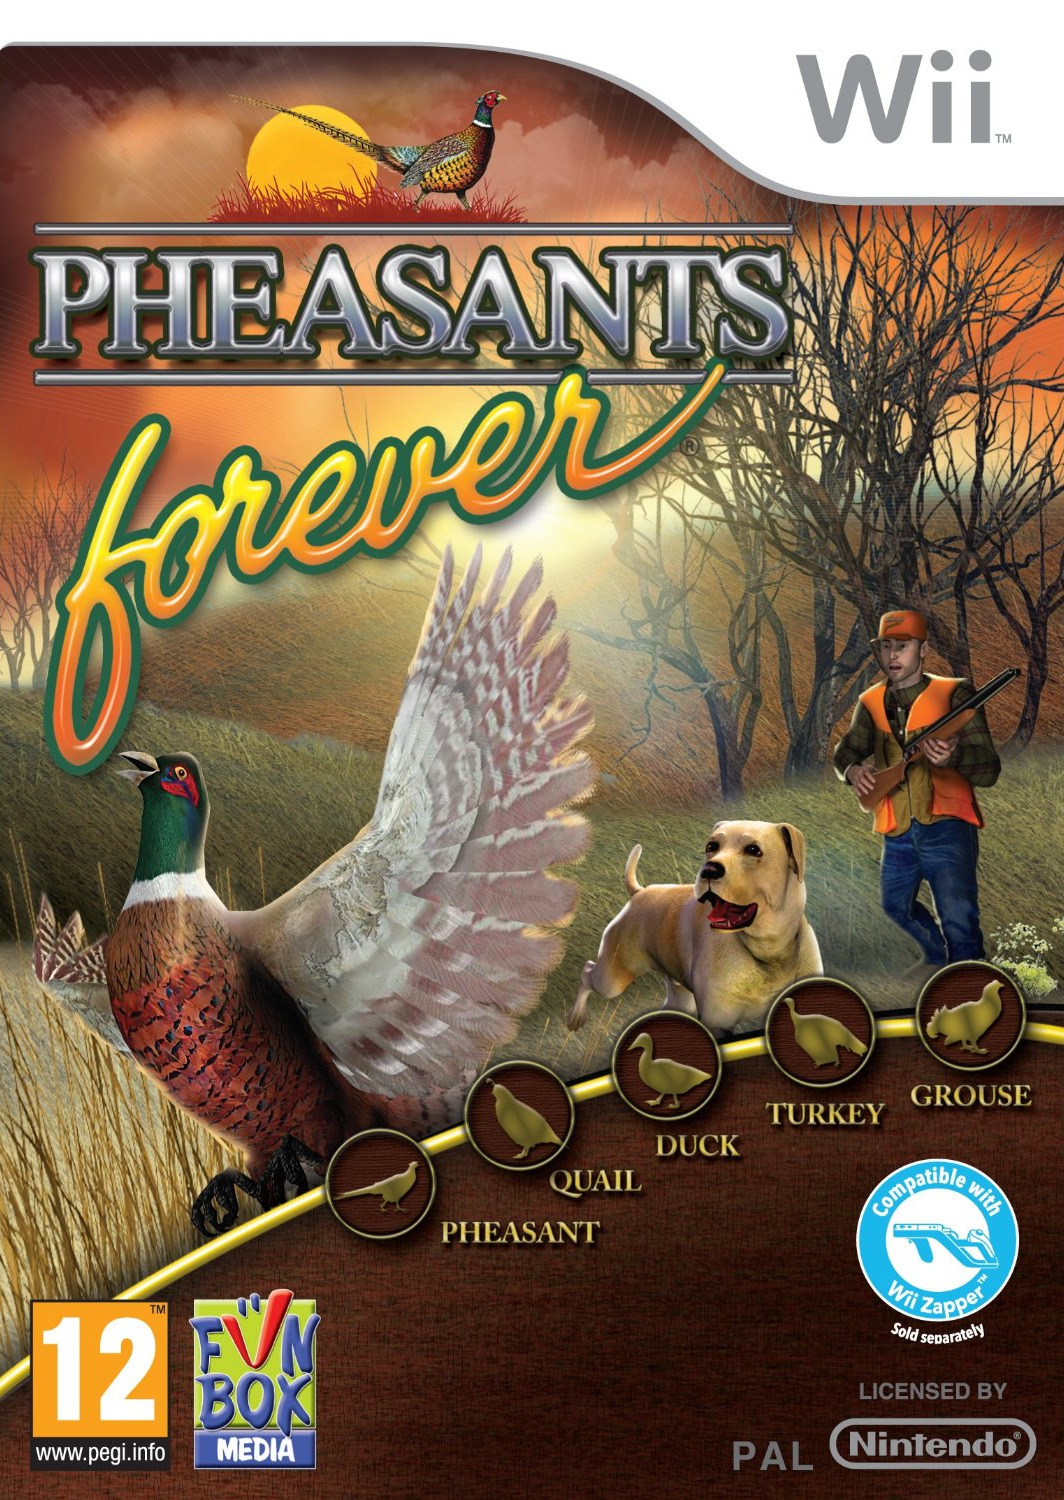 Pheasants Forever : Wingshooter -Wii (Exclue) [FS] [WU] Jaquette-pheasants-forever-wingshooter-wii-cover-avant-g-1311155351